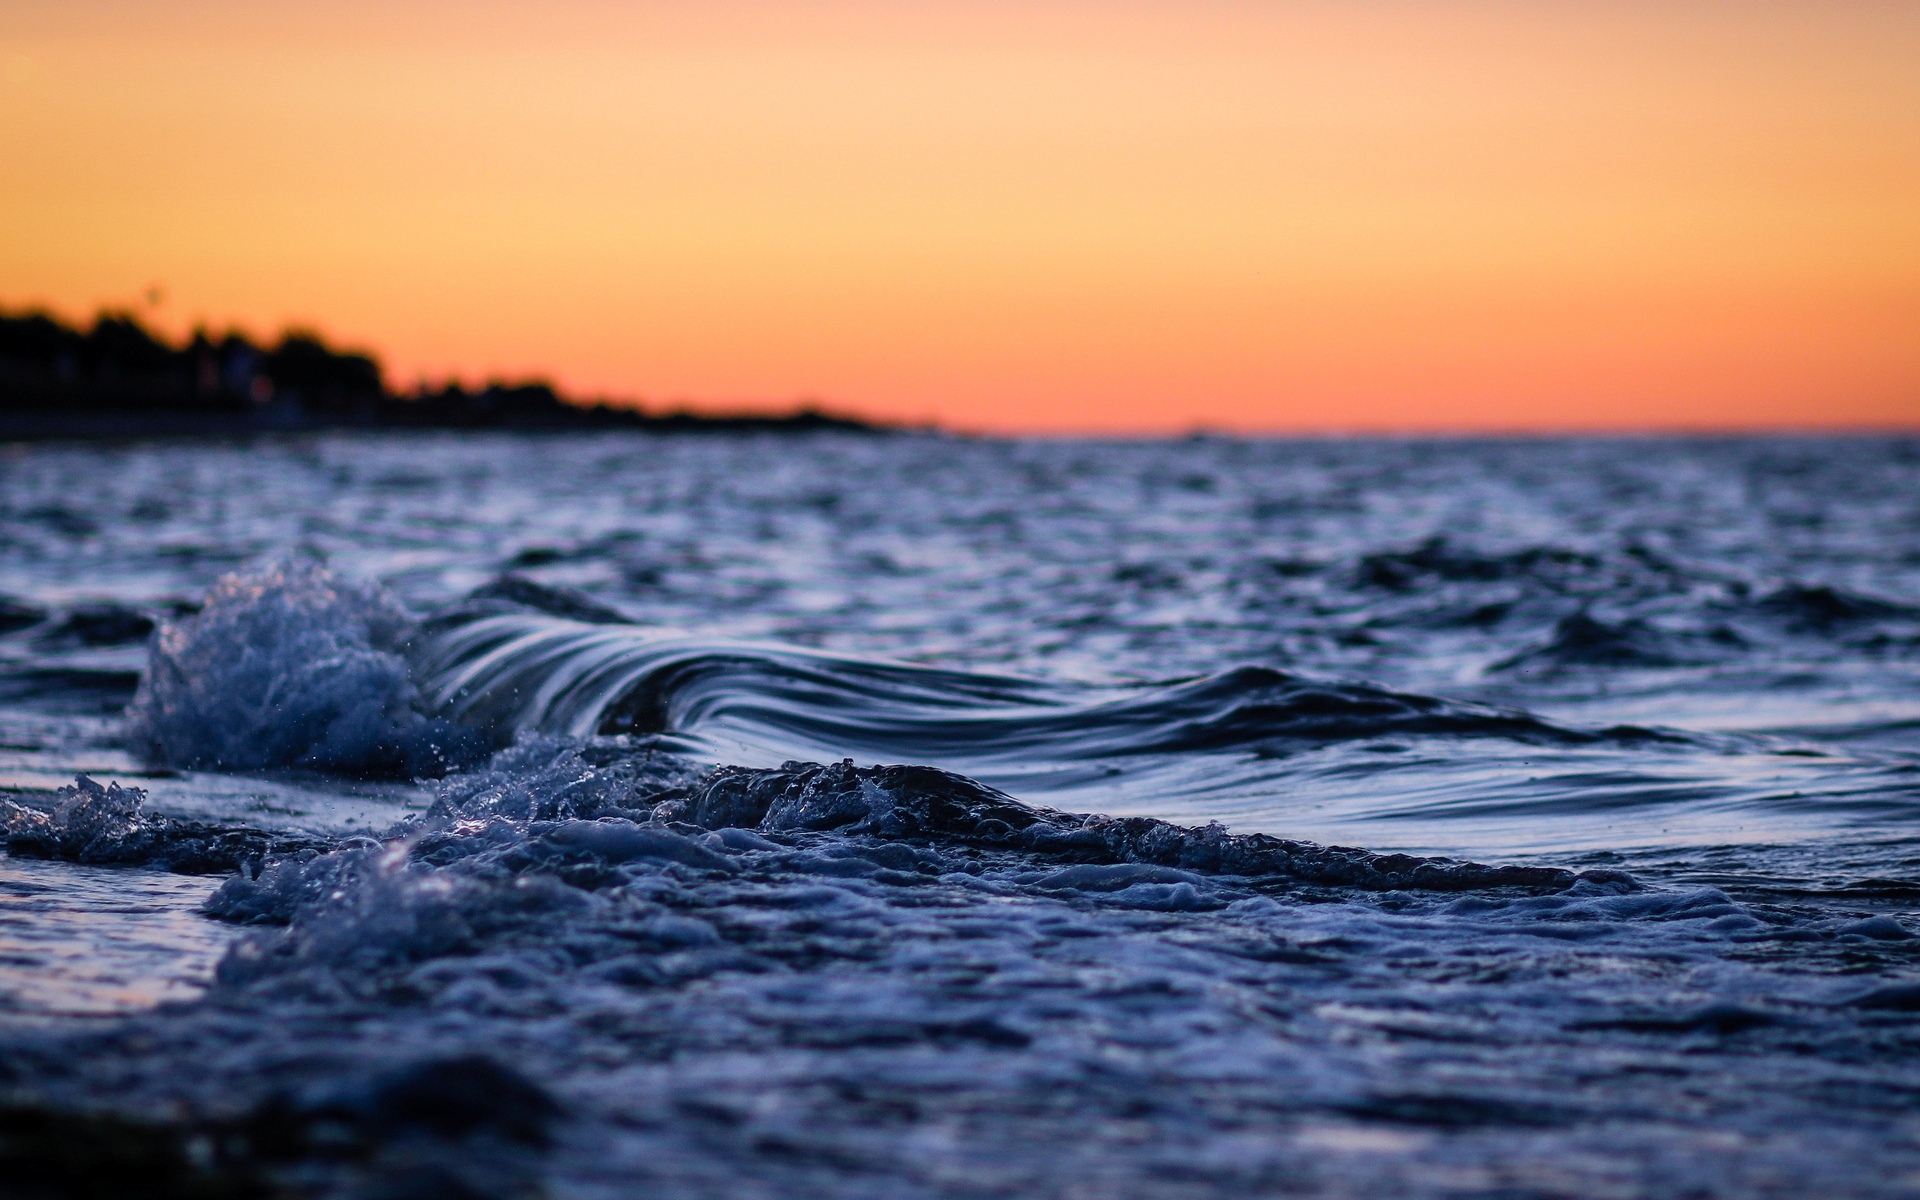 General 1920x1200 water waves landscape nature sea sunset beach